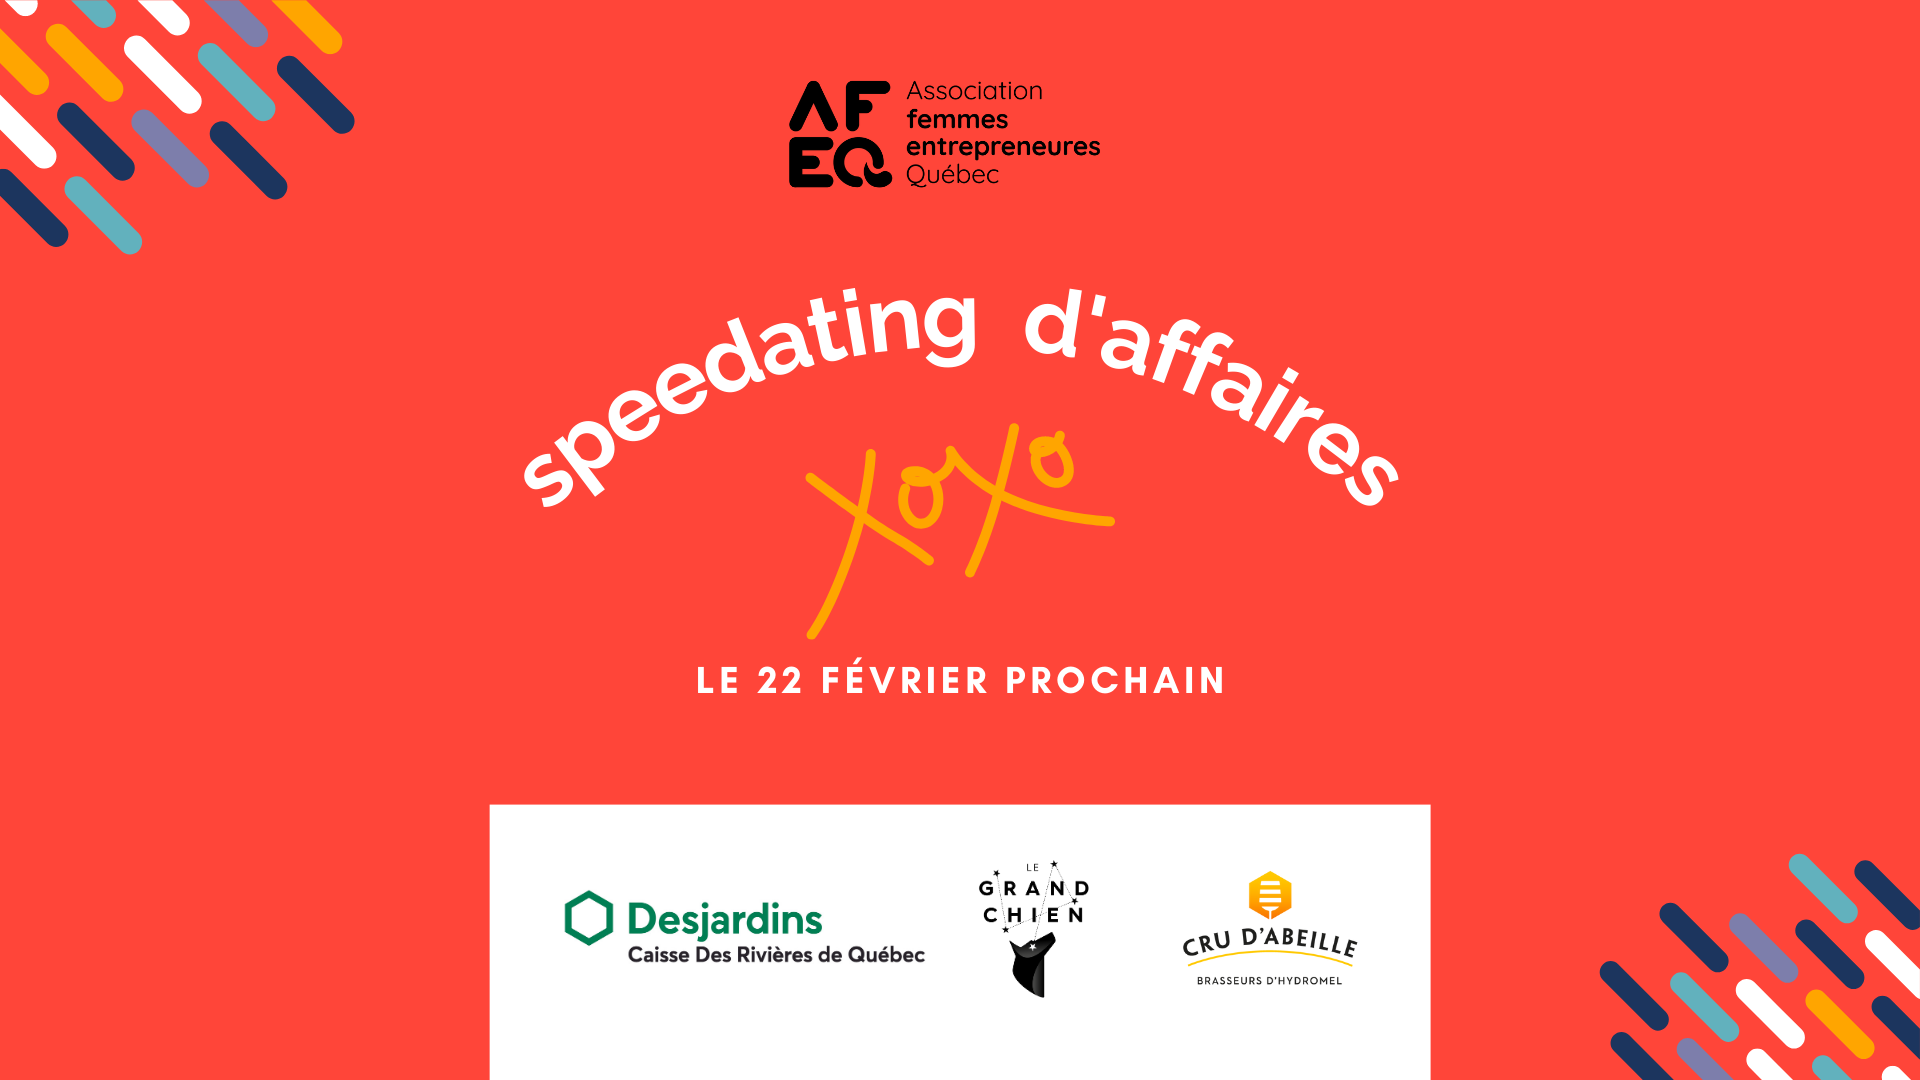 5@7 Speed dating d’affaires